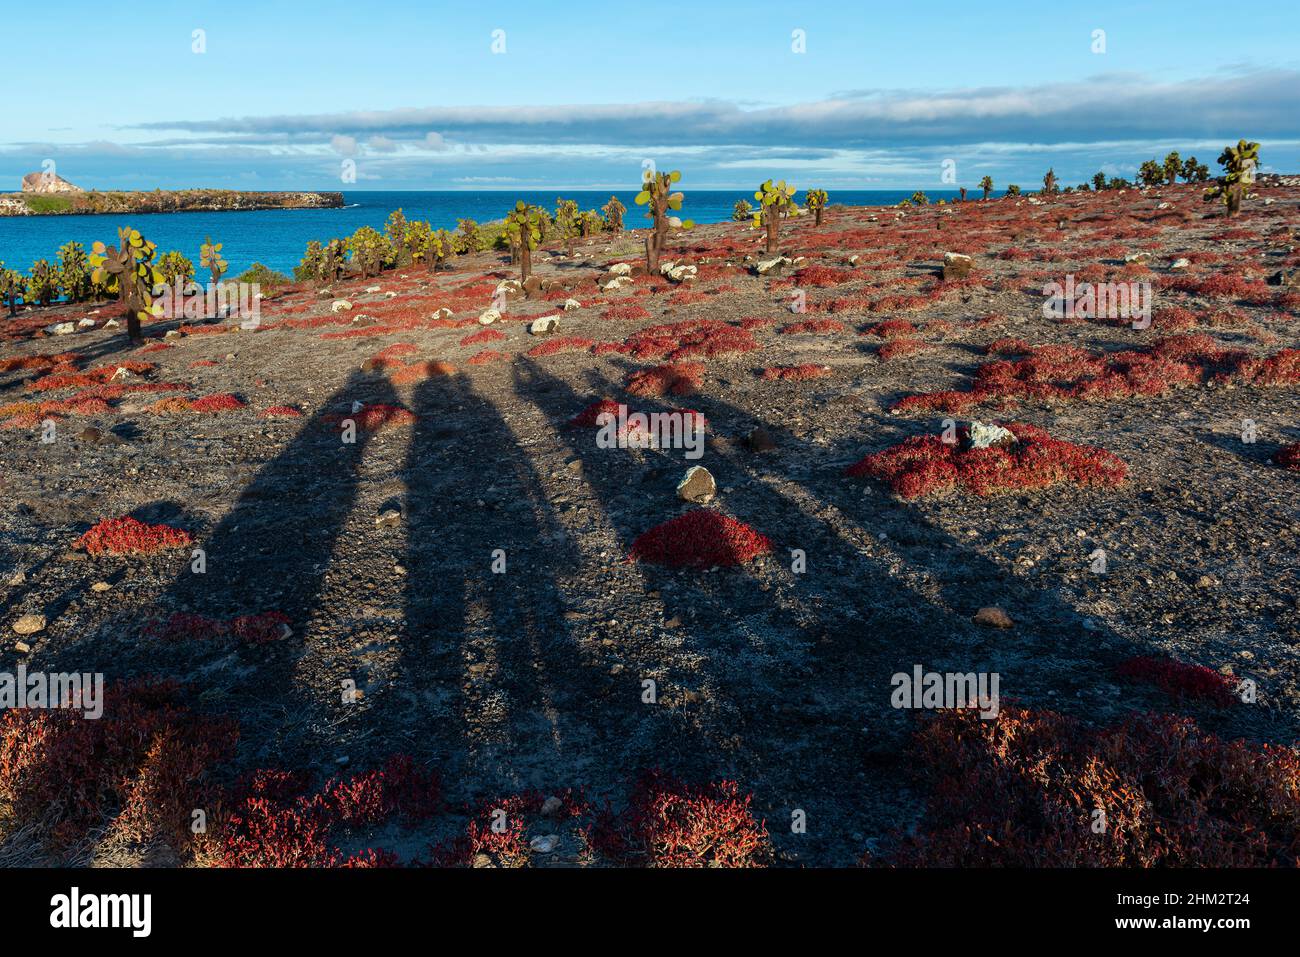 Tourist shadows on Galapagos South Plaza island landscape at sunset with prickly pear cactus and red sesuvium plant, Galapagos national park, Ecuador. Stock Photo